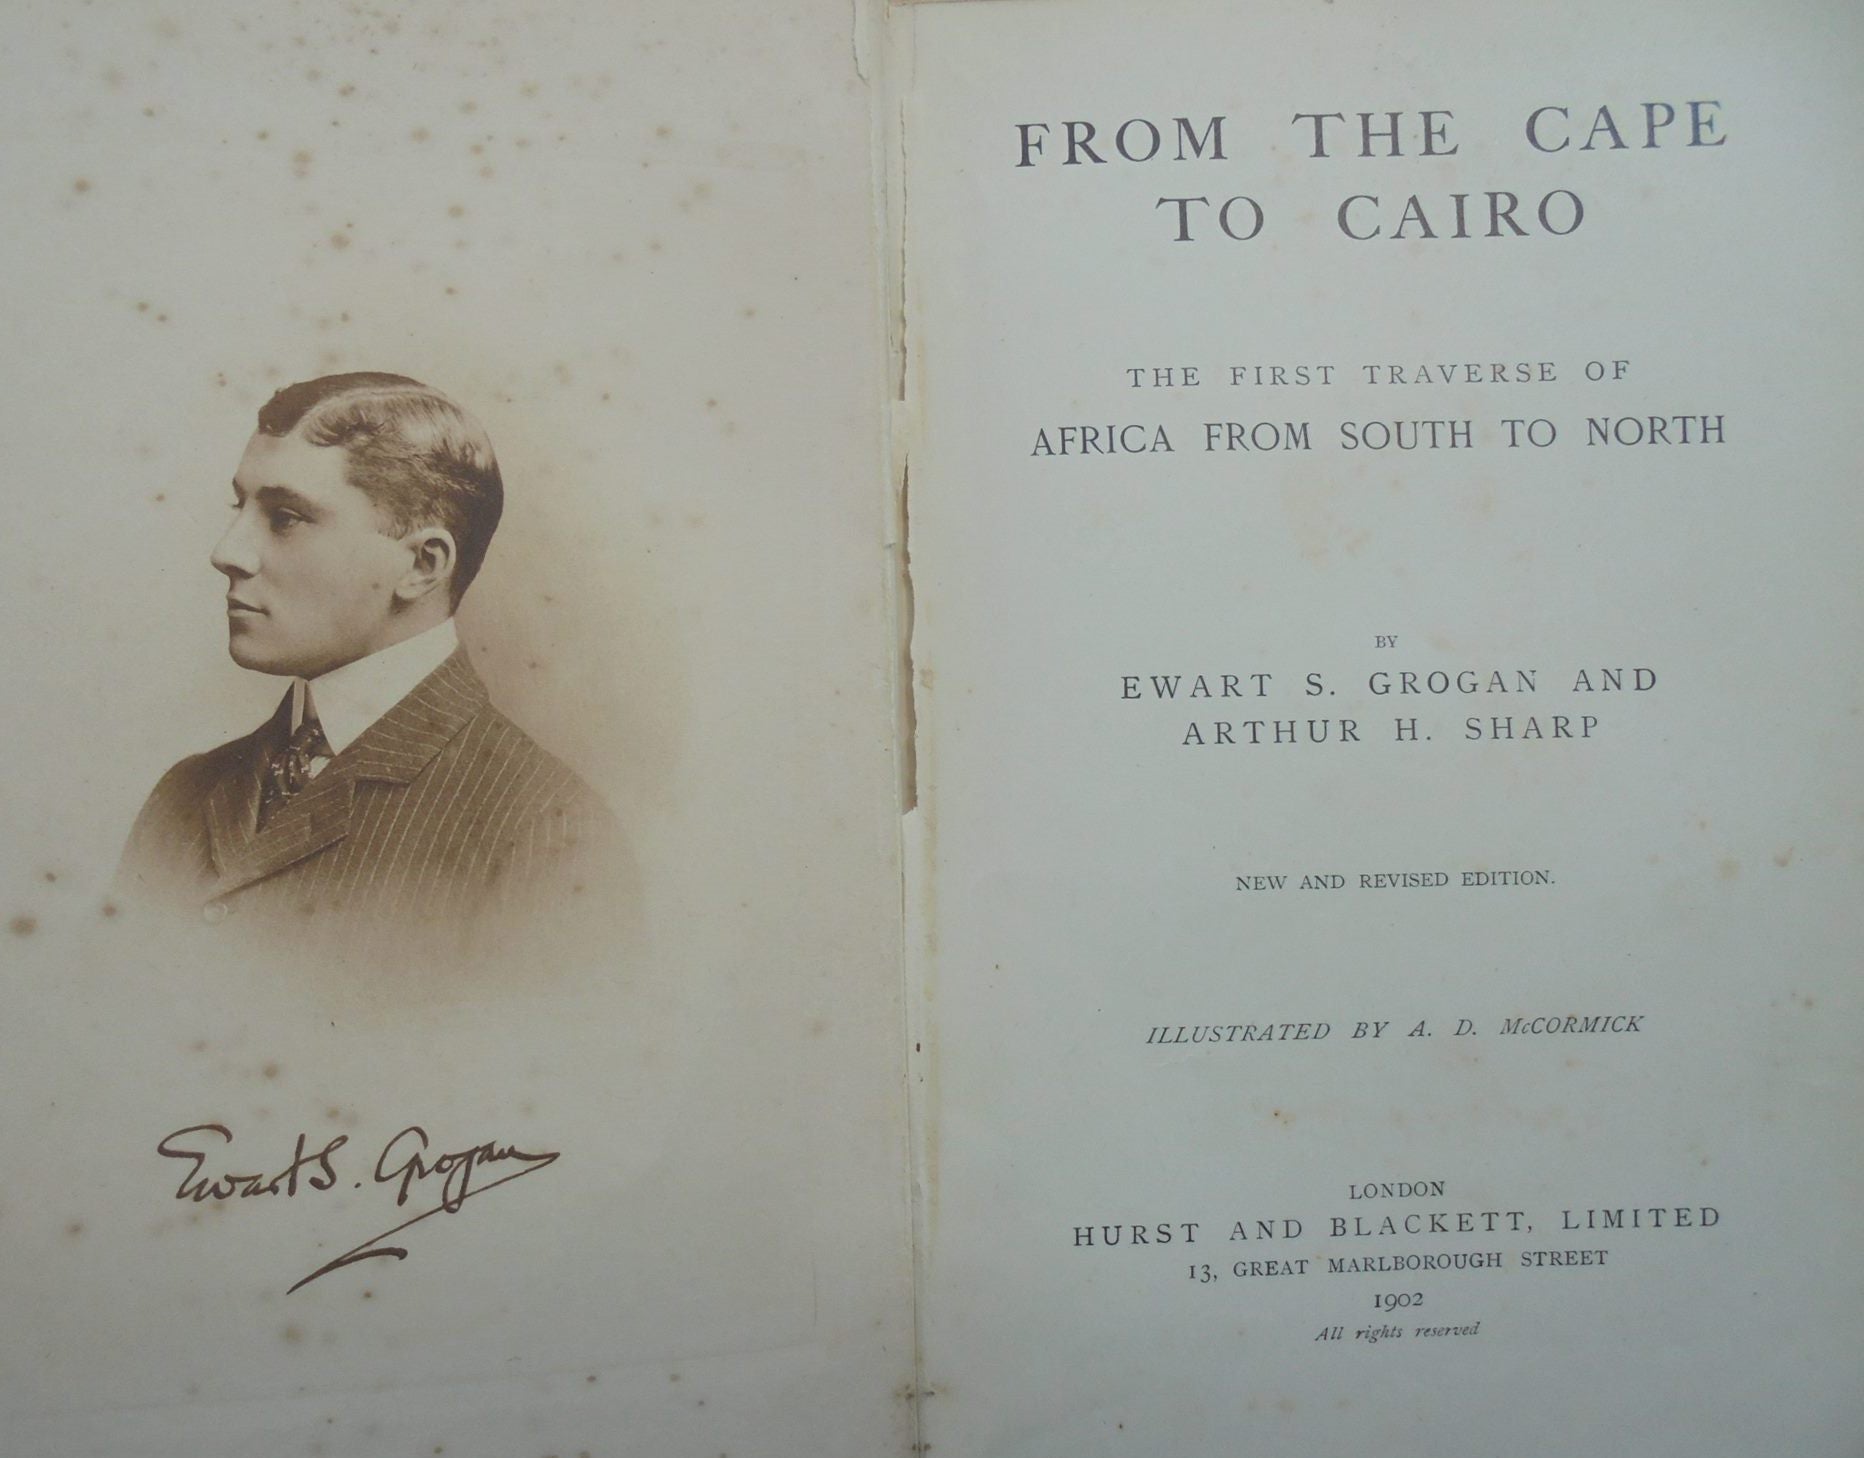 From Cape to Cairo. The First Traverse of Africa from South to North. (1902)